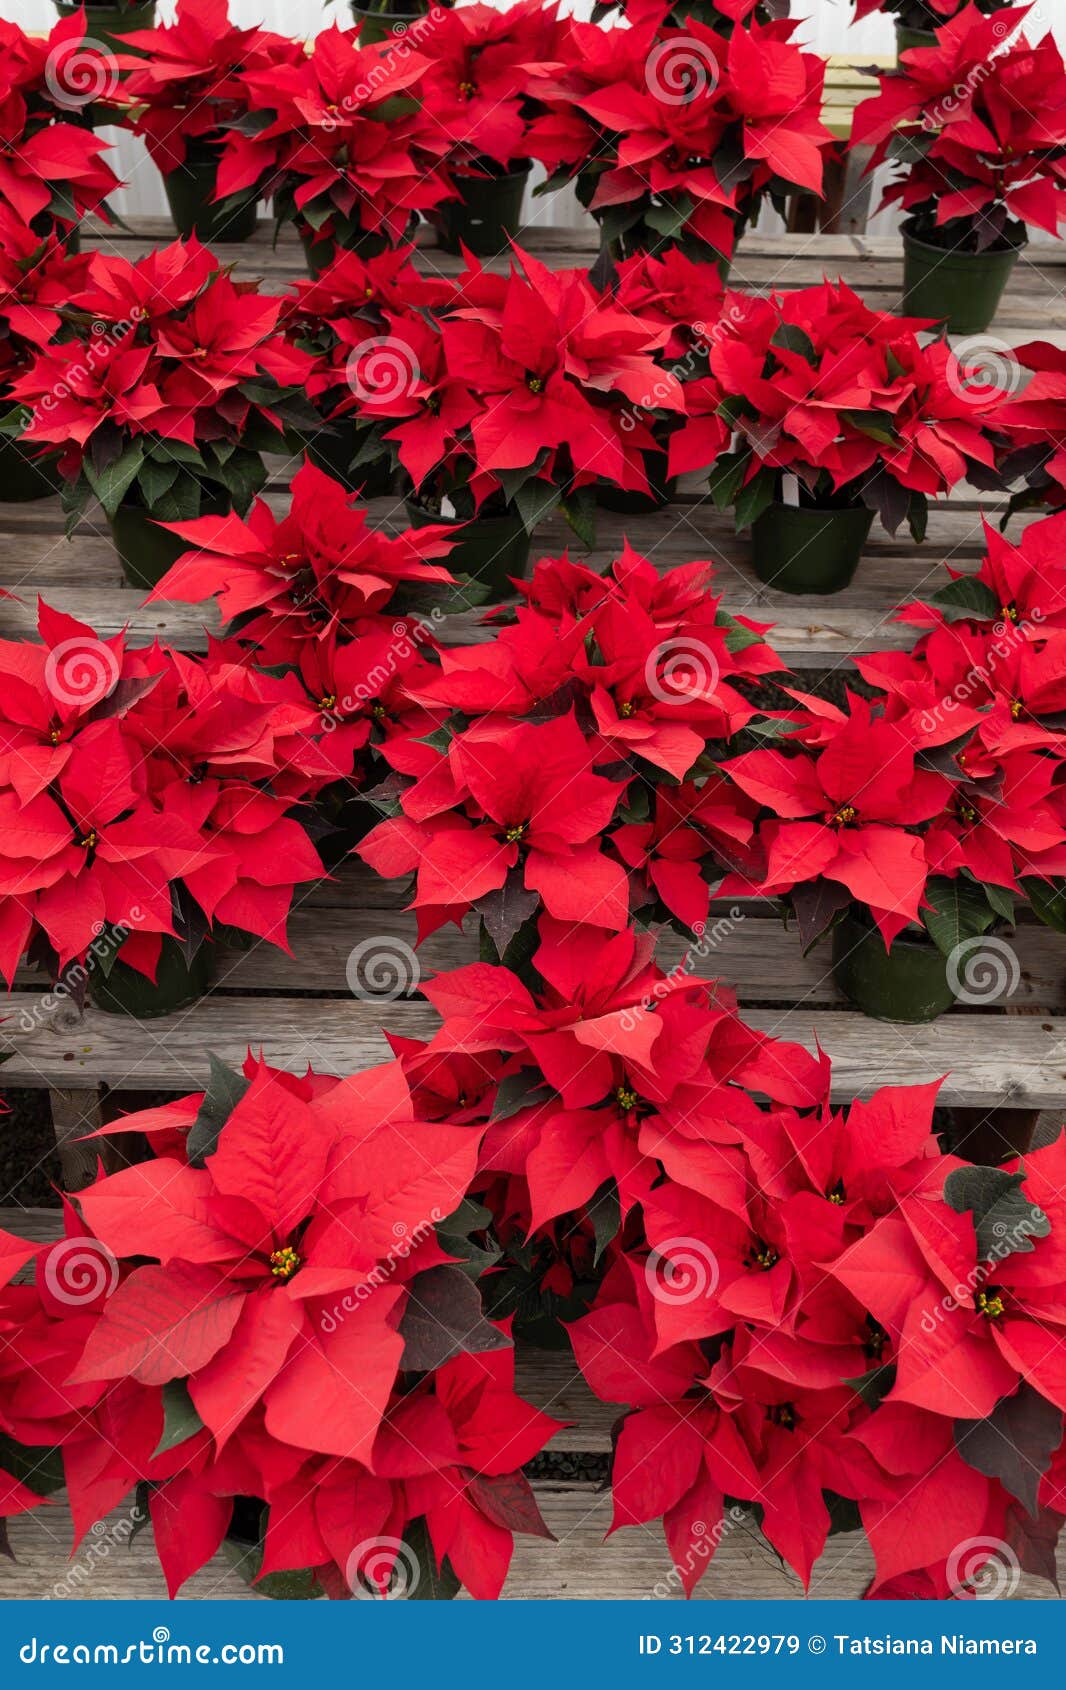 manyred striking poinsettia flower, with star-d red leaves, christmas eve flower